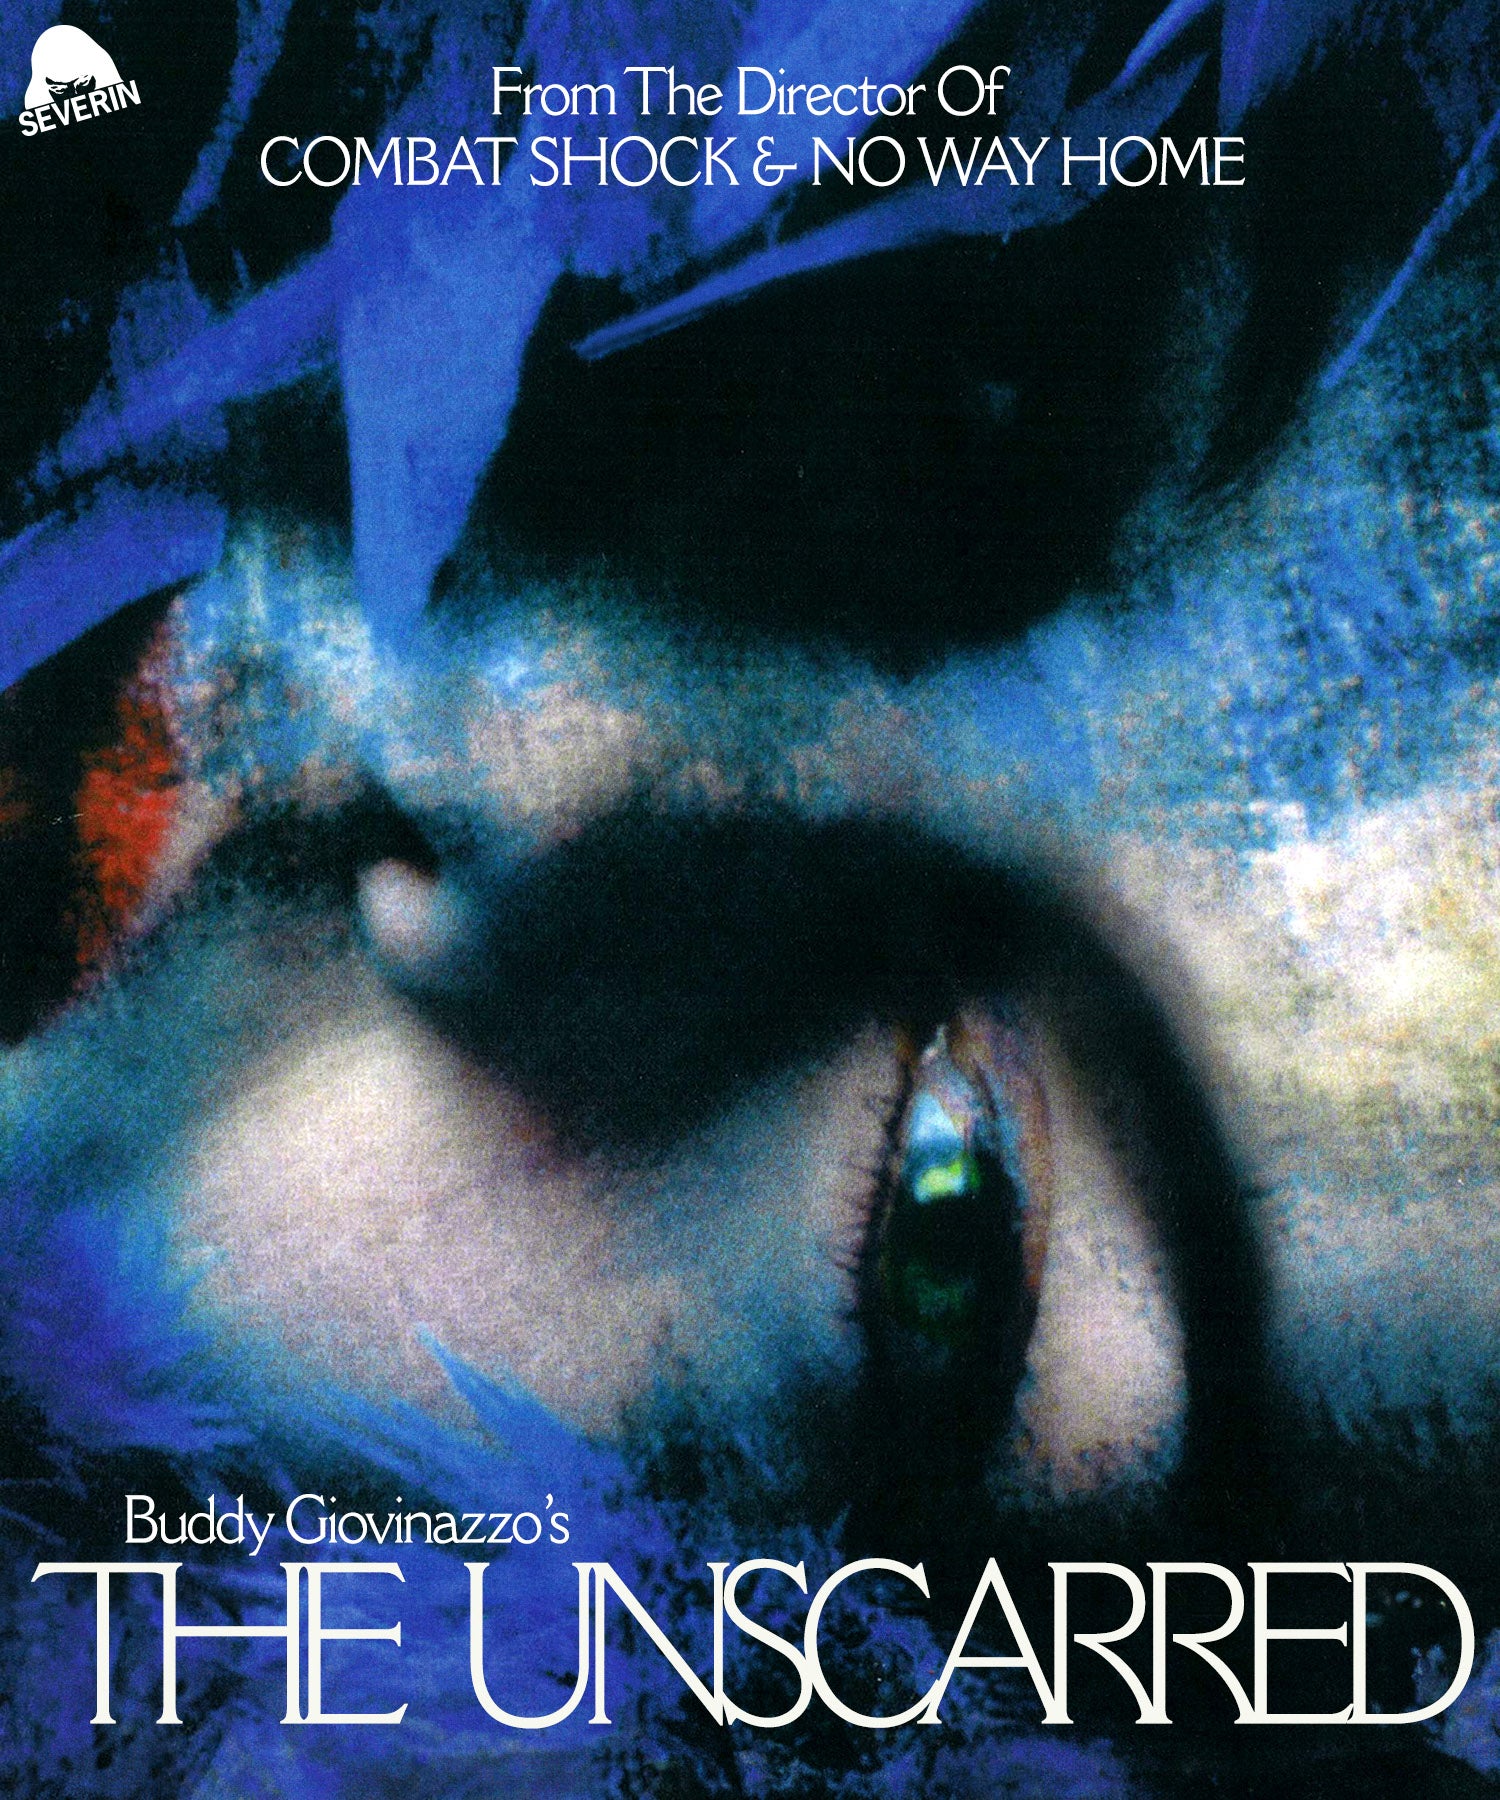 THE UNSCARRED BLU-RAY